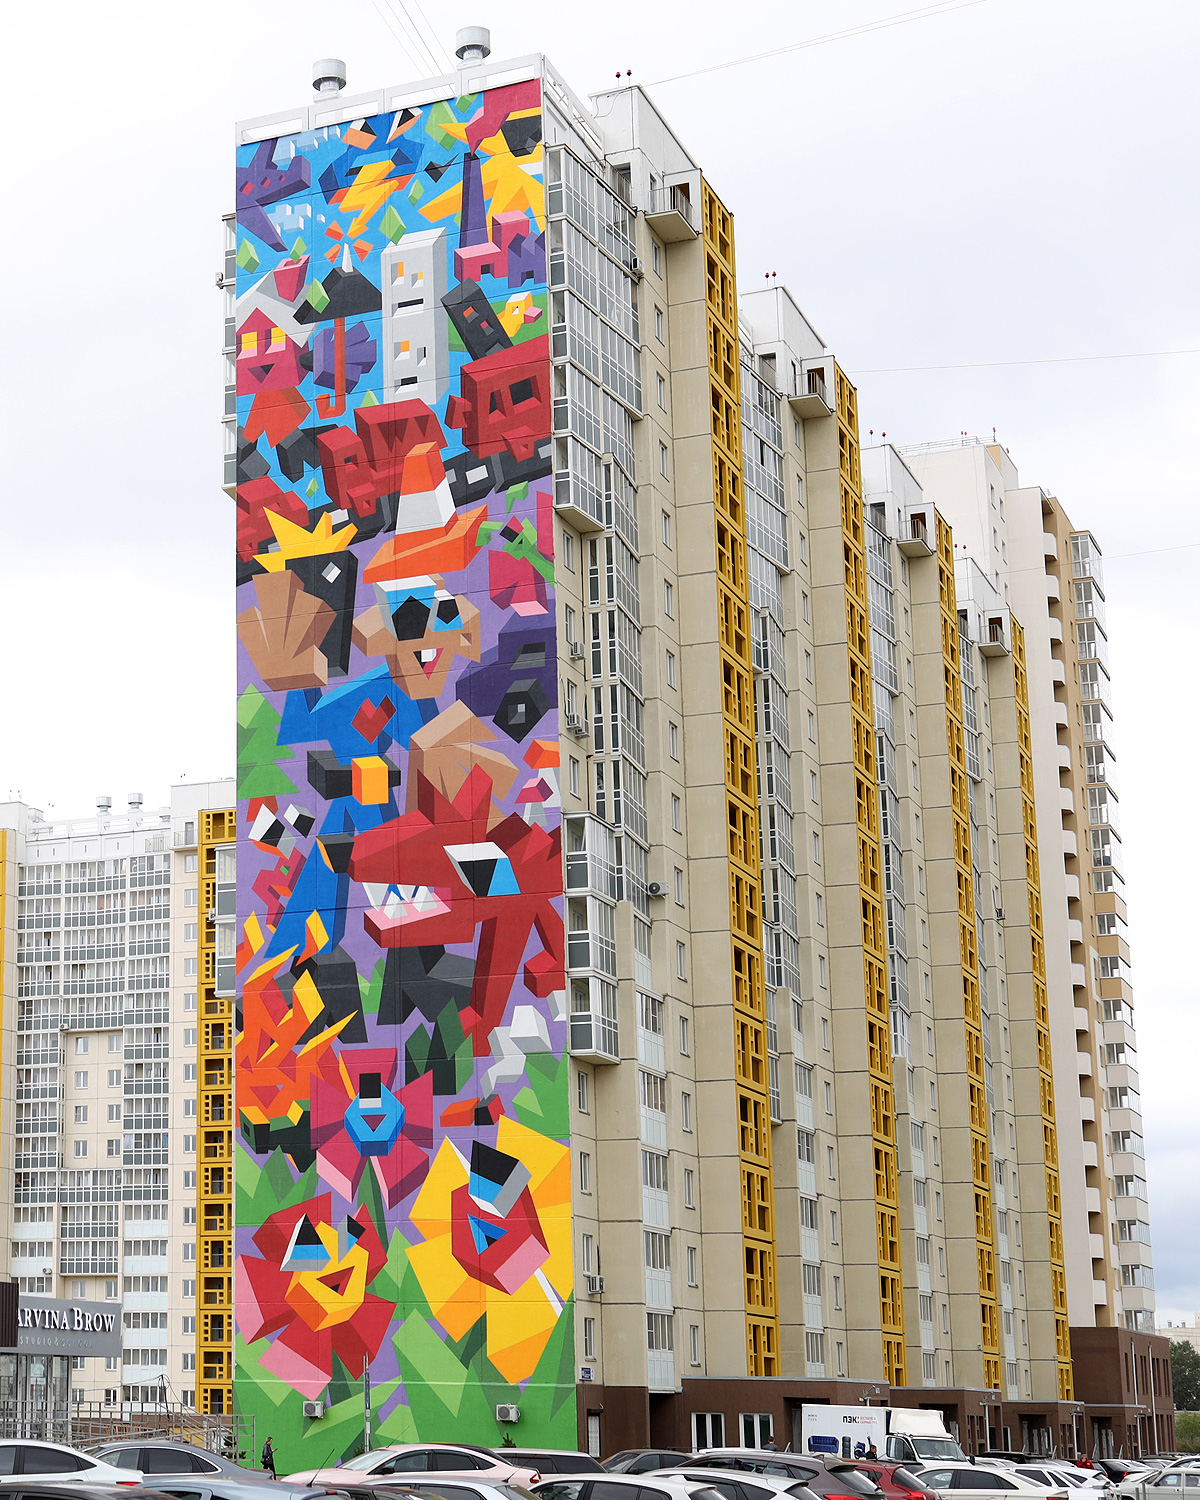 A Colorful Geometric Mural of a Cityscape Visualizes Humans’ Impact on Nature | 国外美陈 美陈网站 美陈前沿 